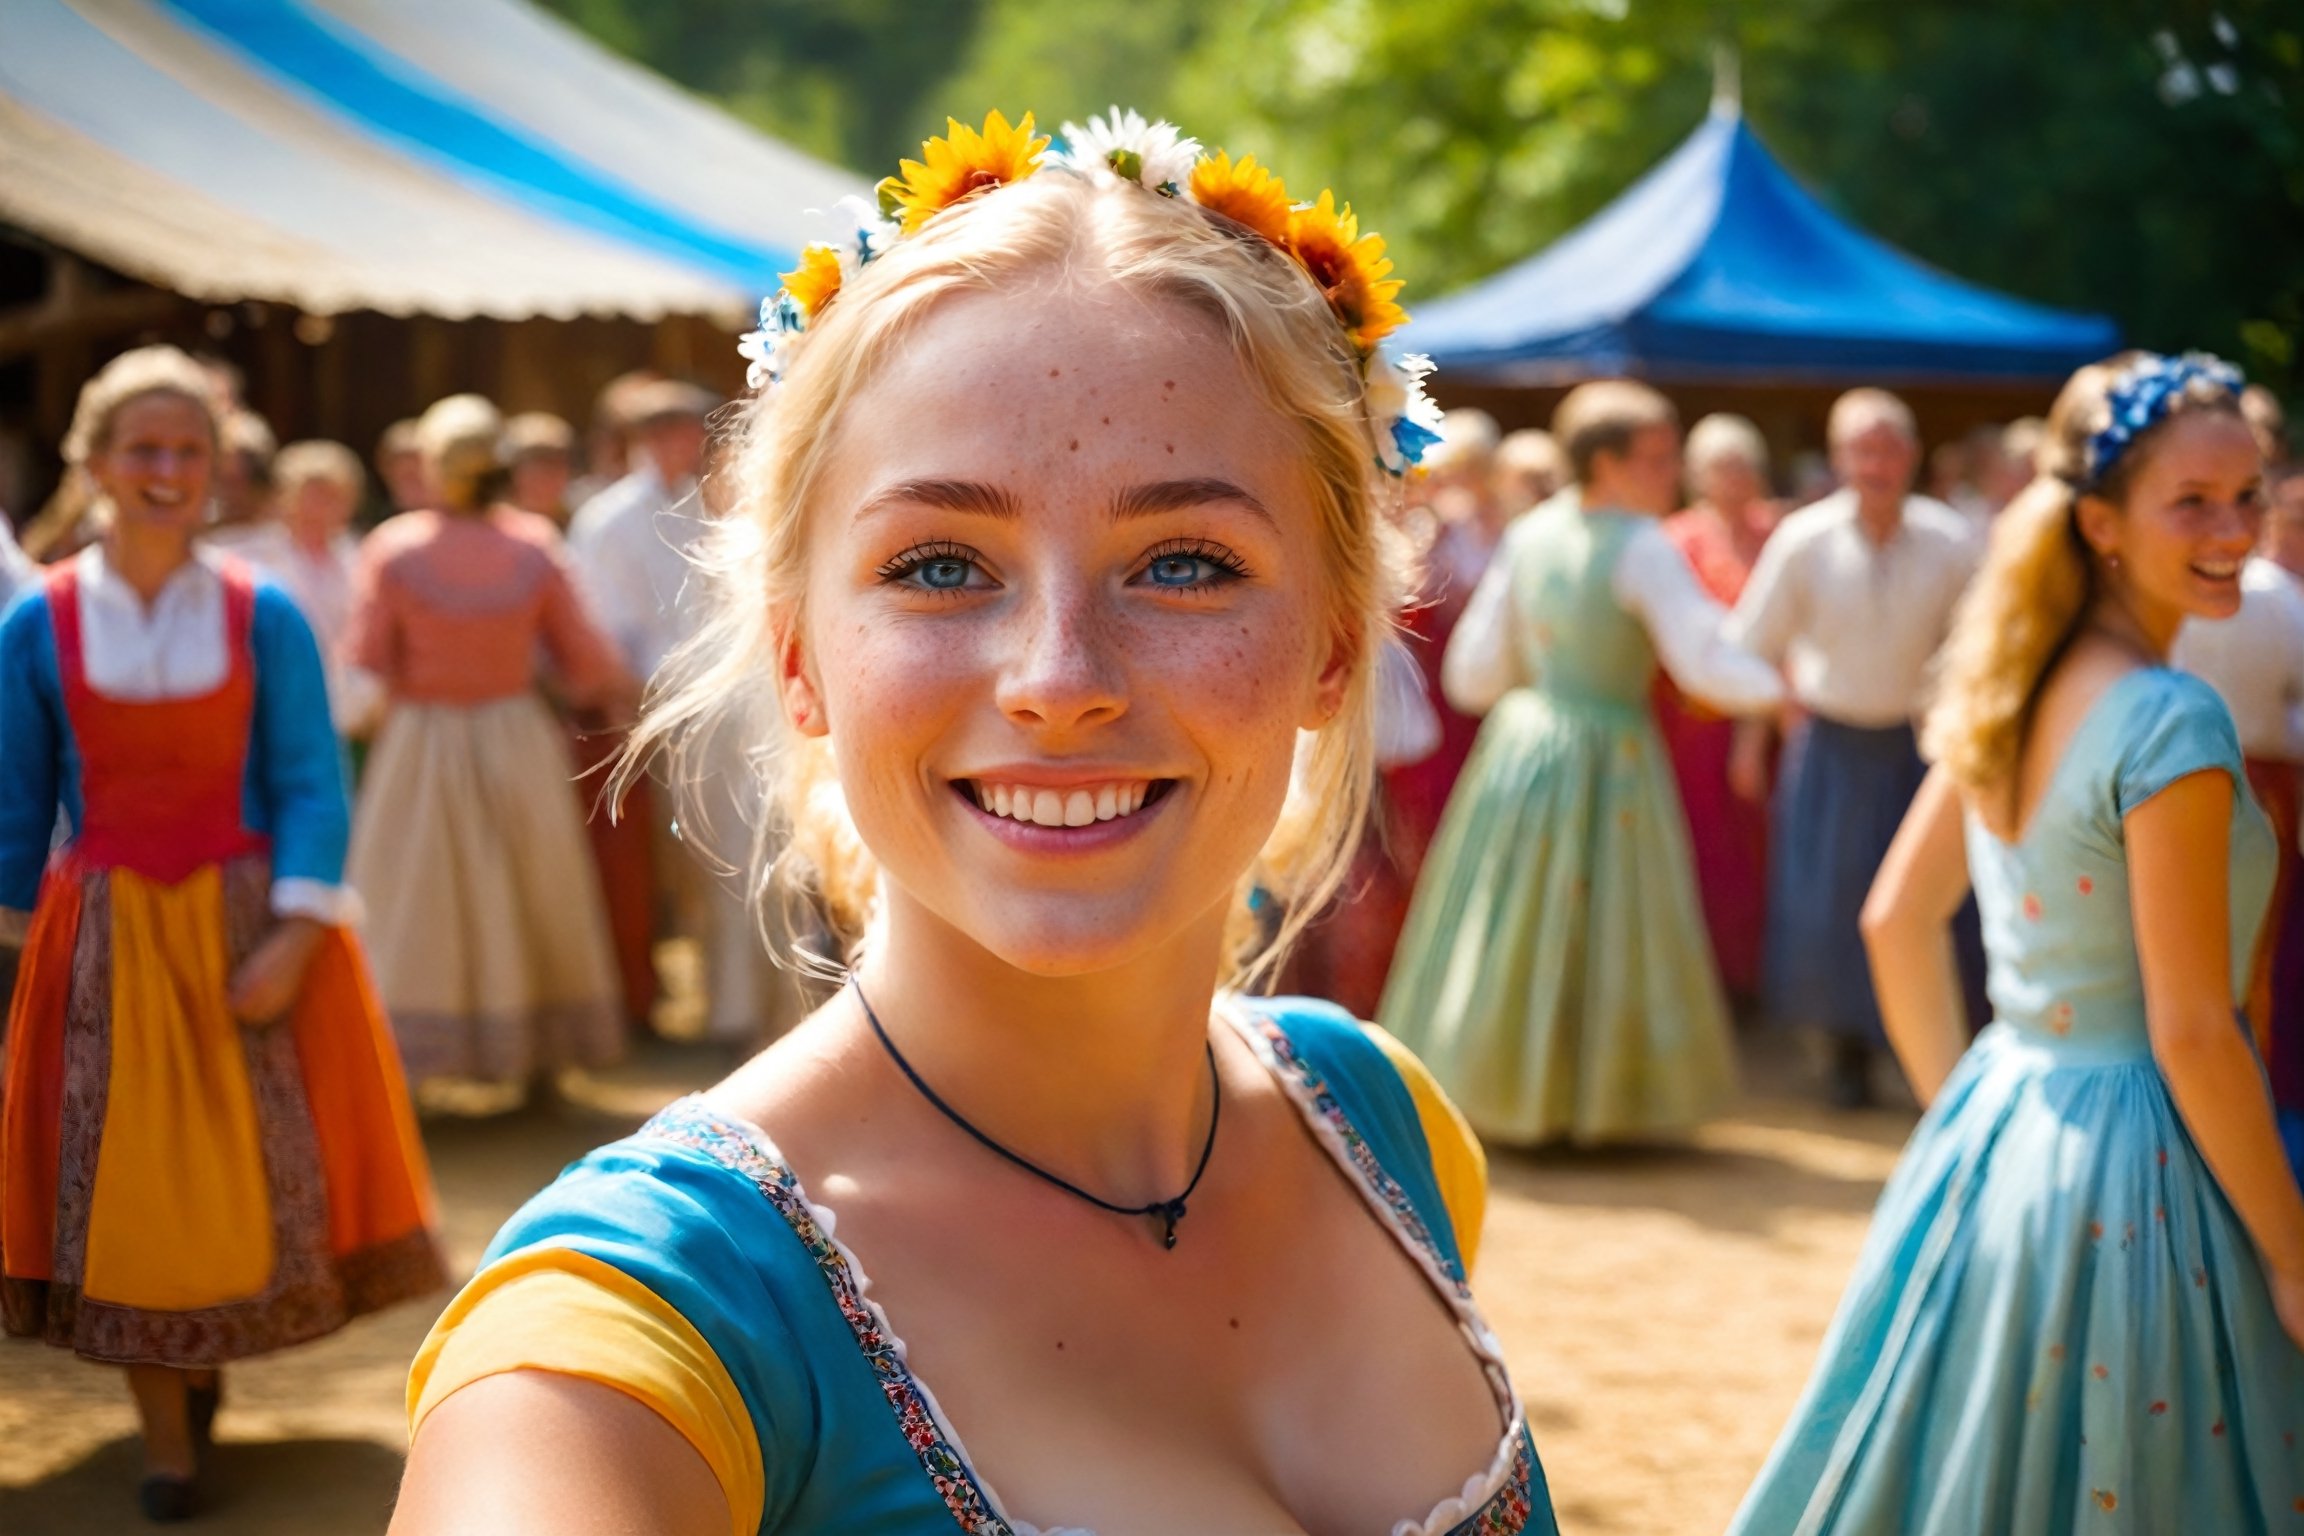 A photograph of a 25-year-old blonde female with a warm, joyful face full of freckles and big blue eyes that are looking directly at the viewer. She is captured in mid-dance, wearing a traditional folklore dress during a village festival on a sunny day. The image is taken from the point of view of a man dancing with her, giving the impression that the viewer is her dance partner. Sun rays are filtering through the scene, created with ray tracing to give a lifelike effect of sunlight. The environment is festive and colorful, with the background slightly blurred to focus on her expressive face and the details of her dress. The lighting is natural and bright, enhancing the cheerful atmosphere.,360 View,18thcentury